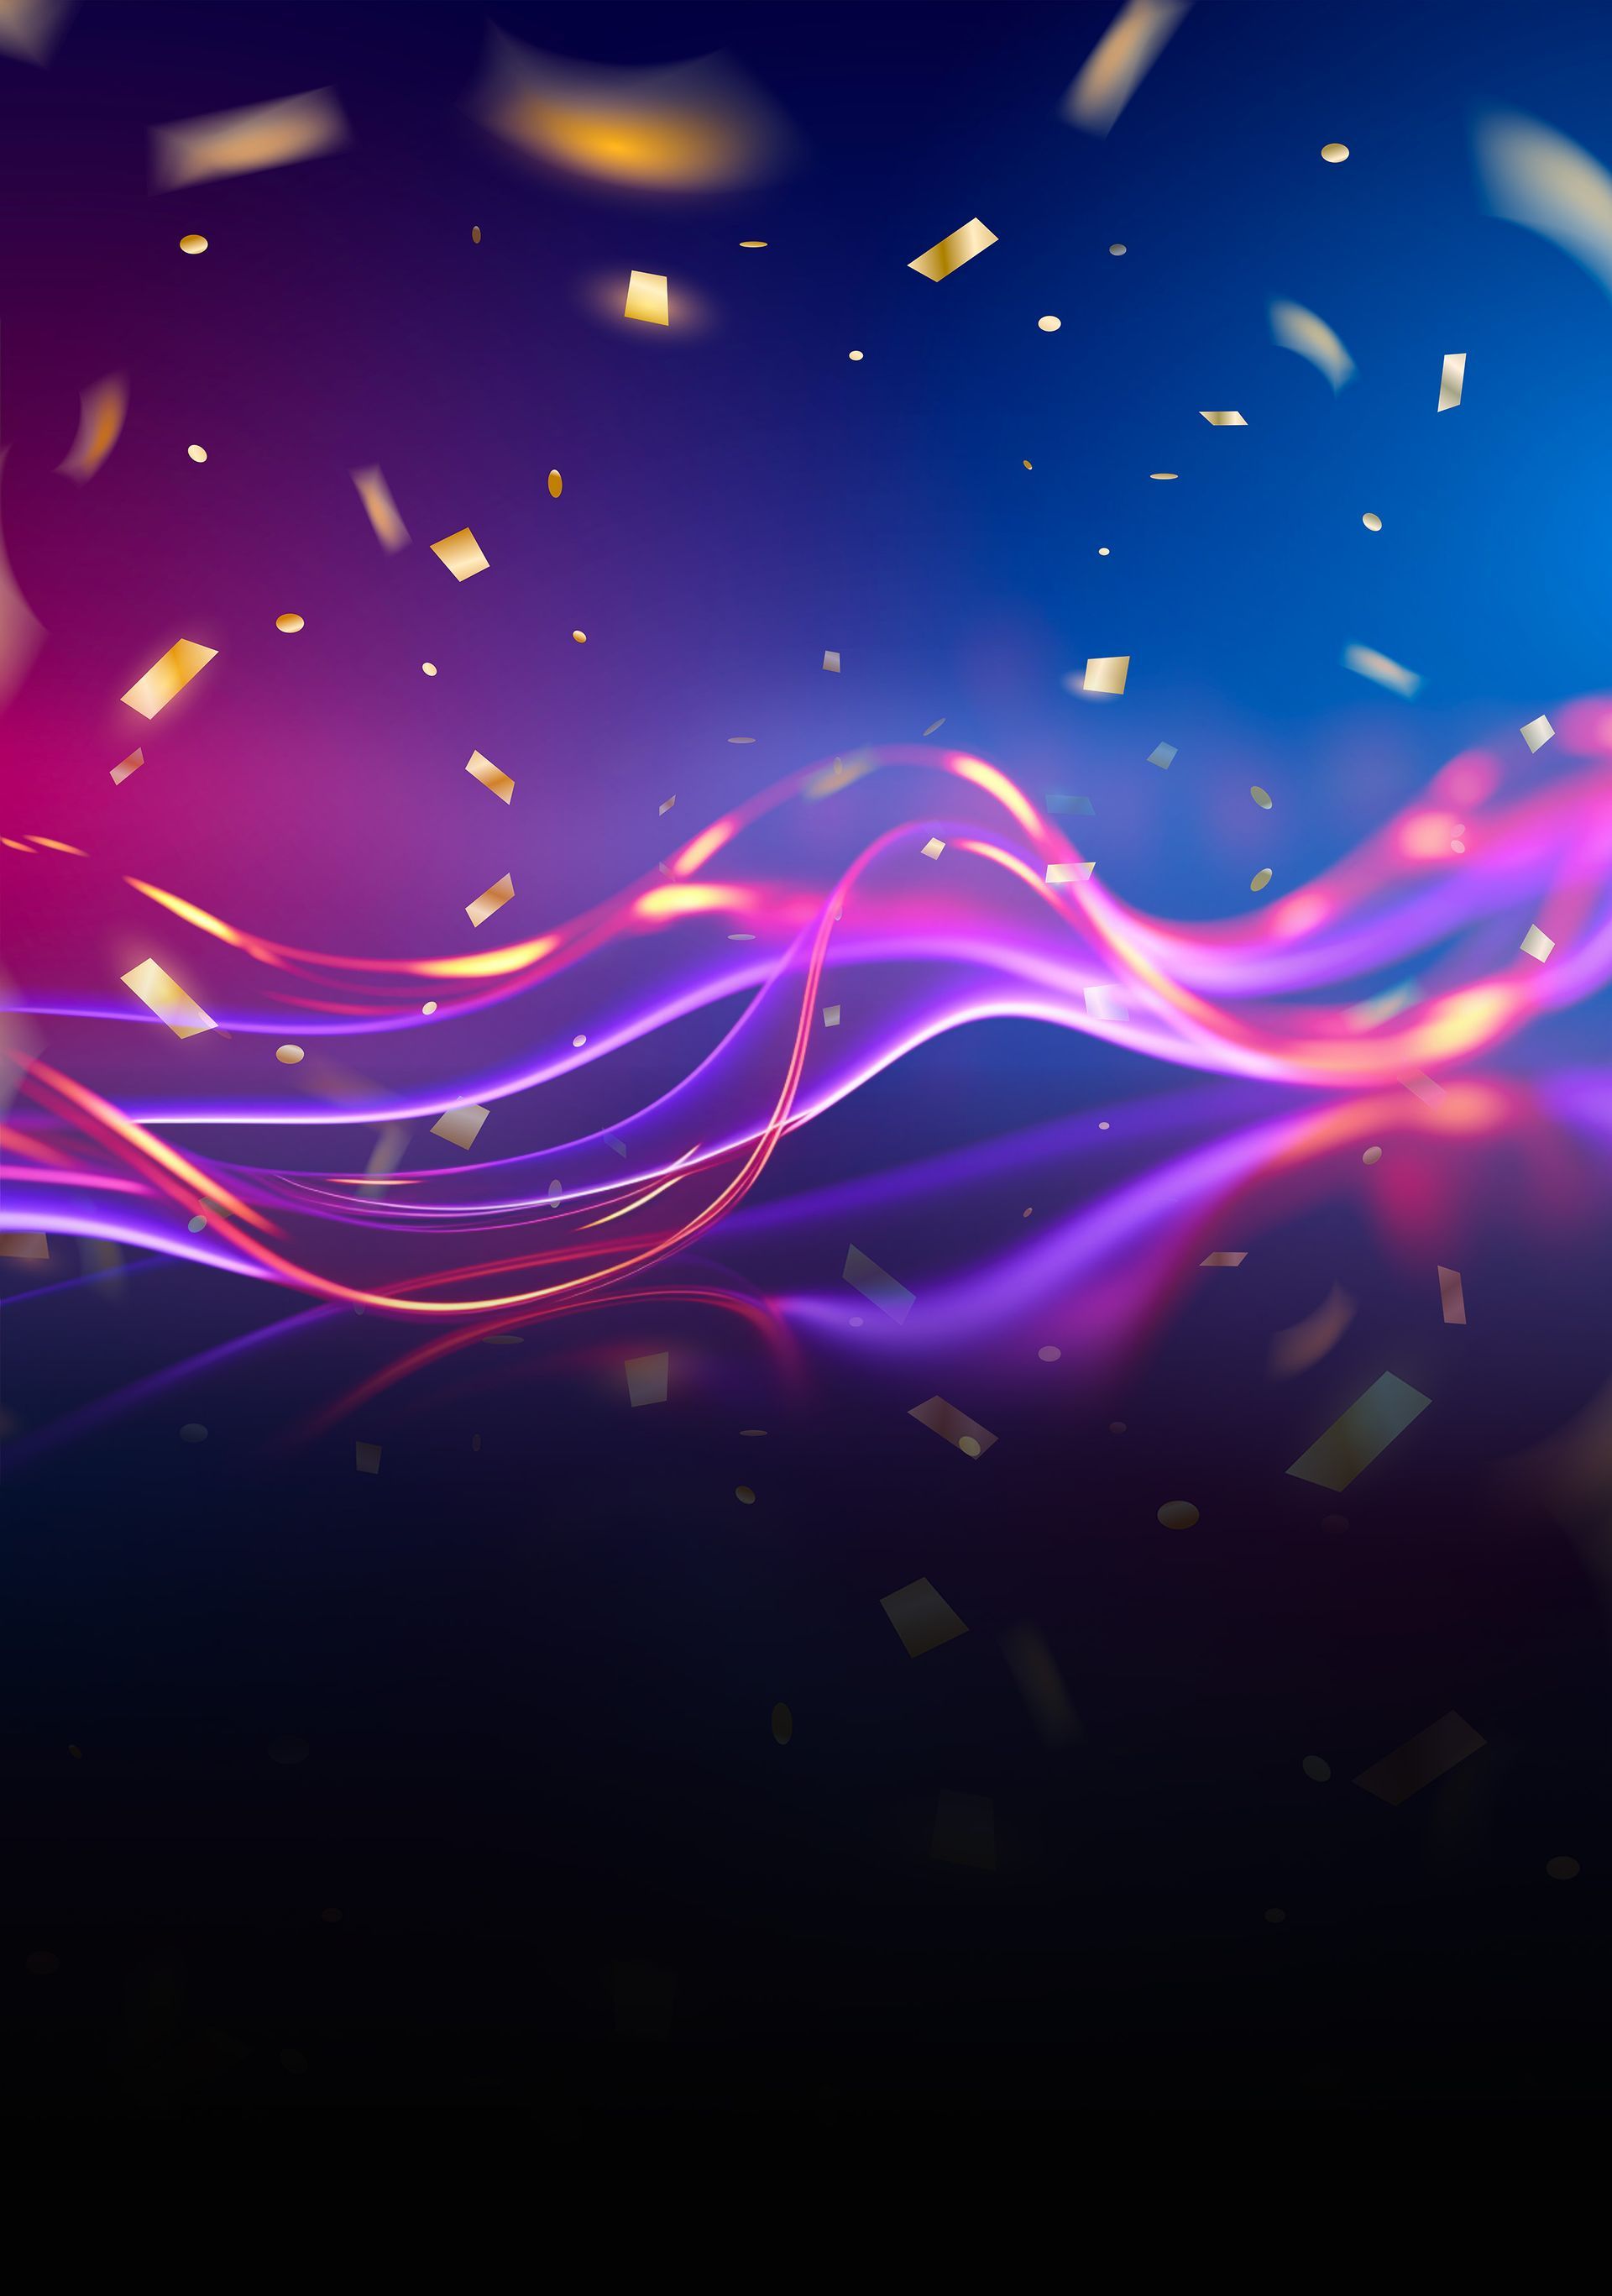 a purple and blue background with confetti falling from the sky